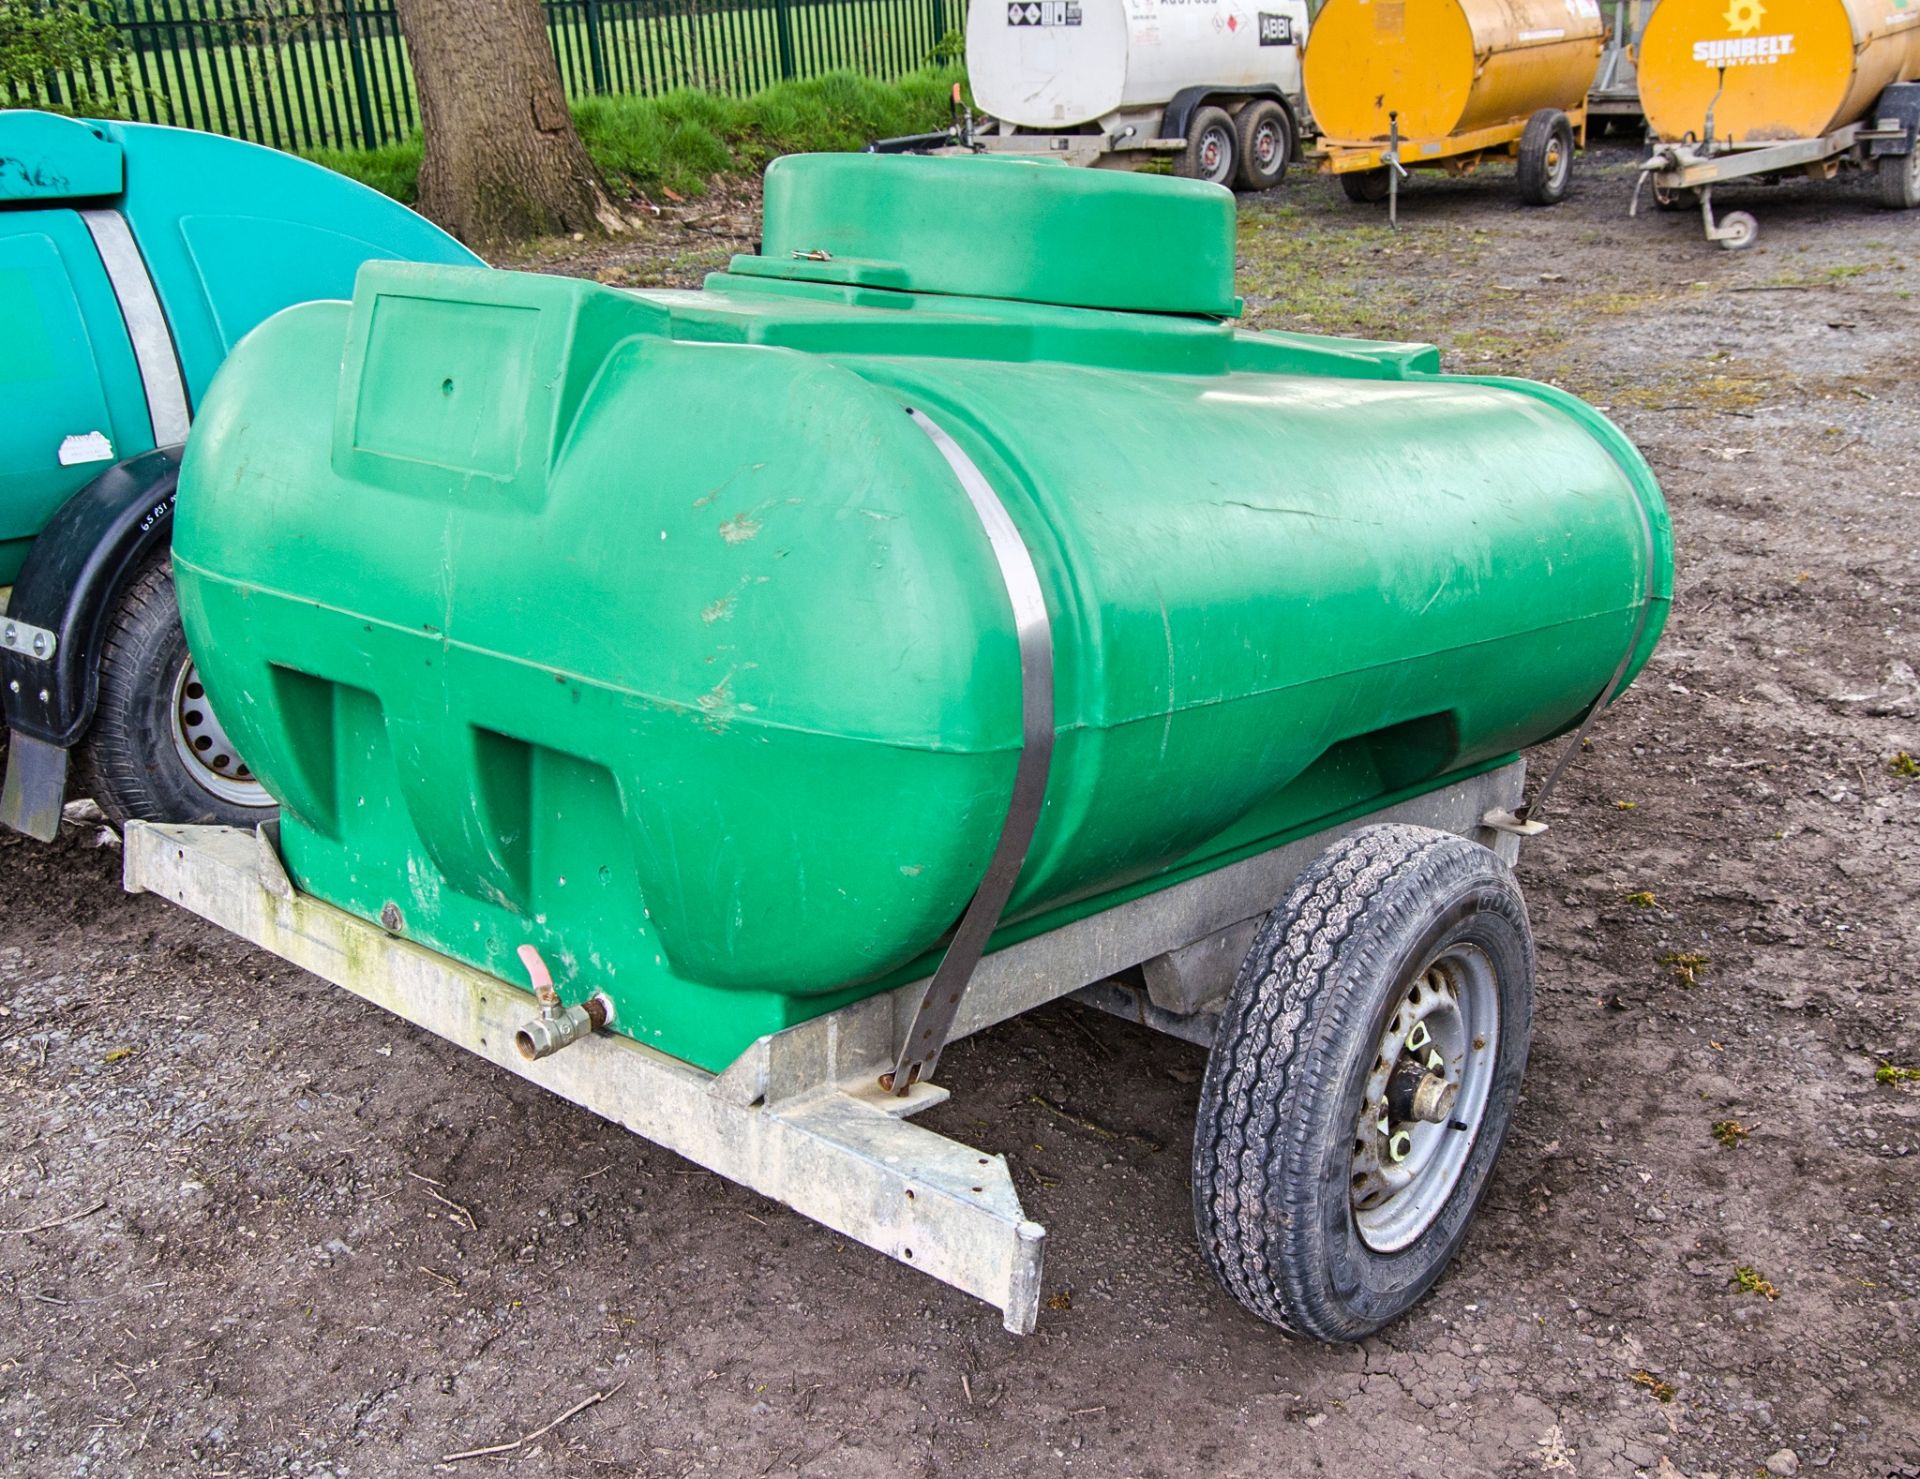 Trailer Engineering 1000 litre site tow mobile water bowser A748236 - Bild 3 aus 6